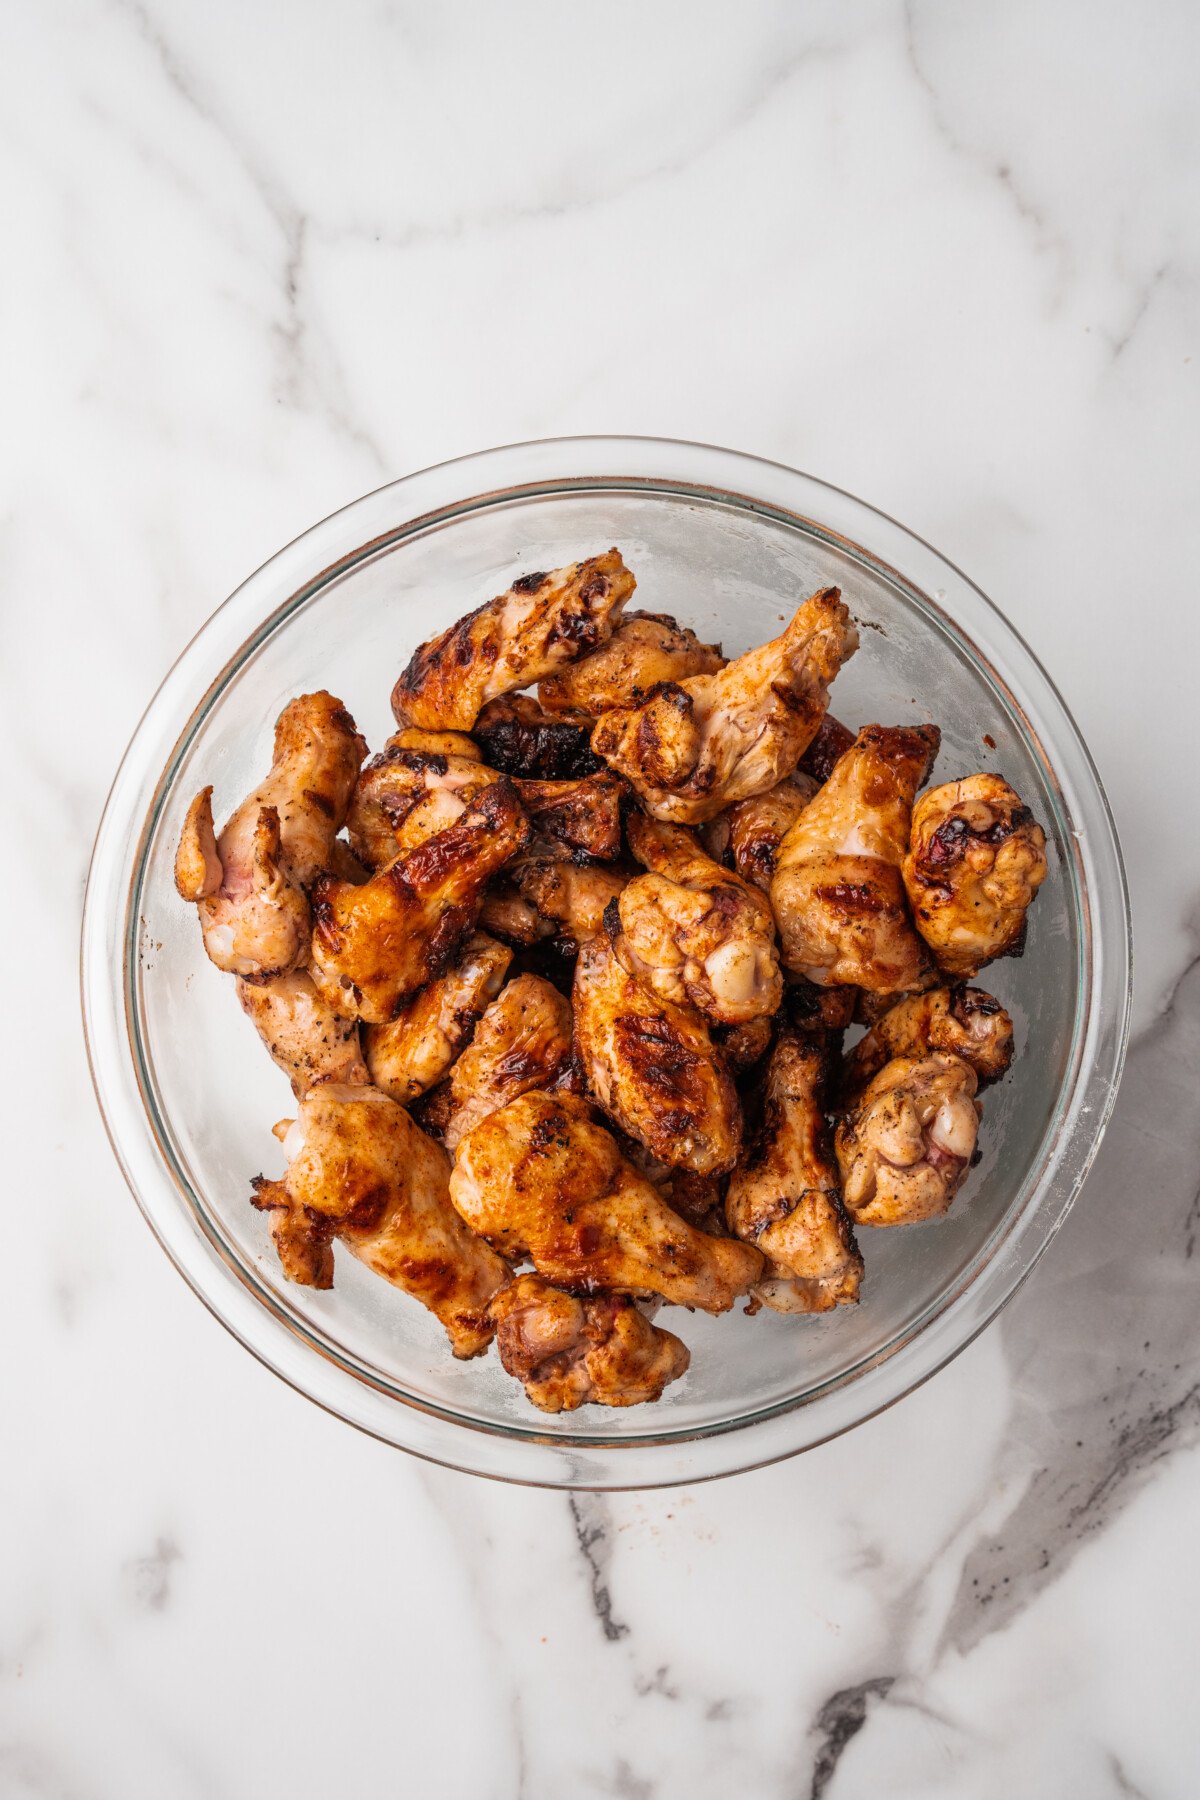 Grilled chicken wings in a bowl.